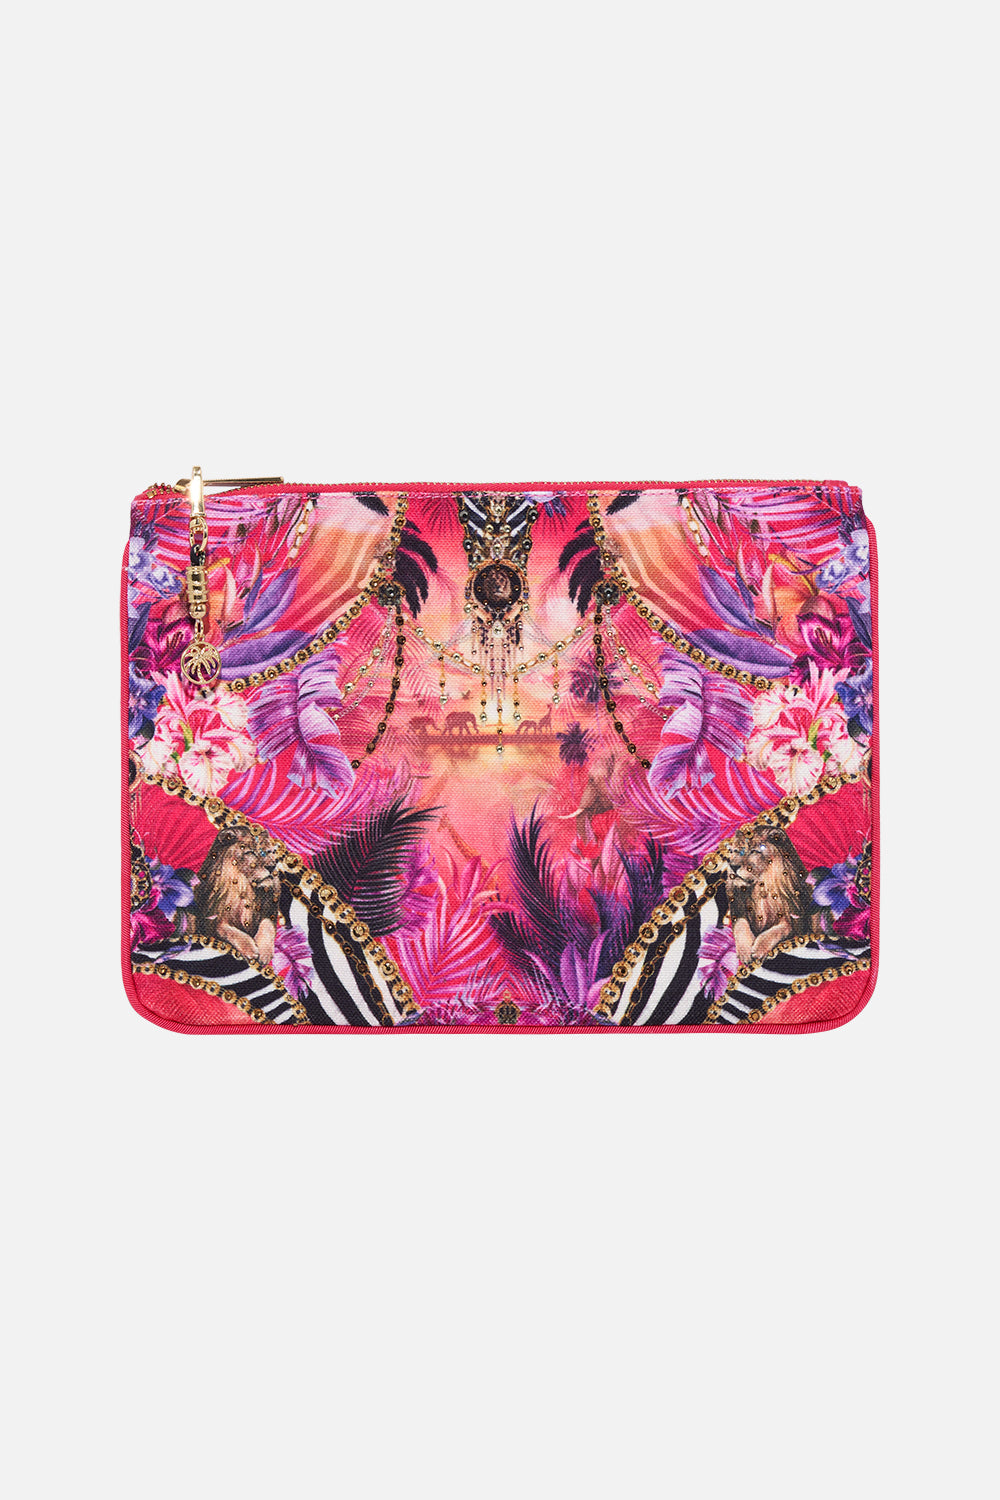 Product view of CAMILLA bright coloured clutch bag in Wild Loving print 